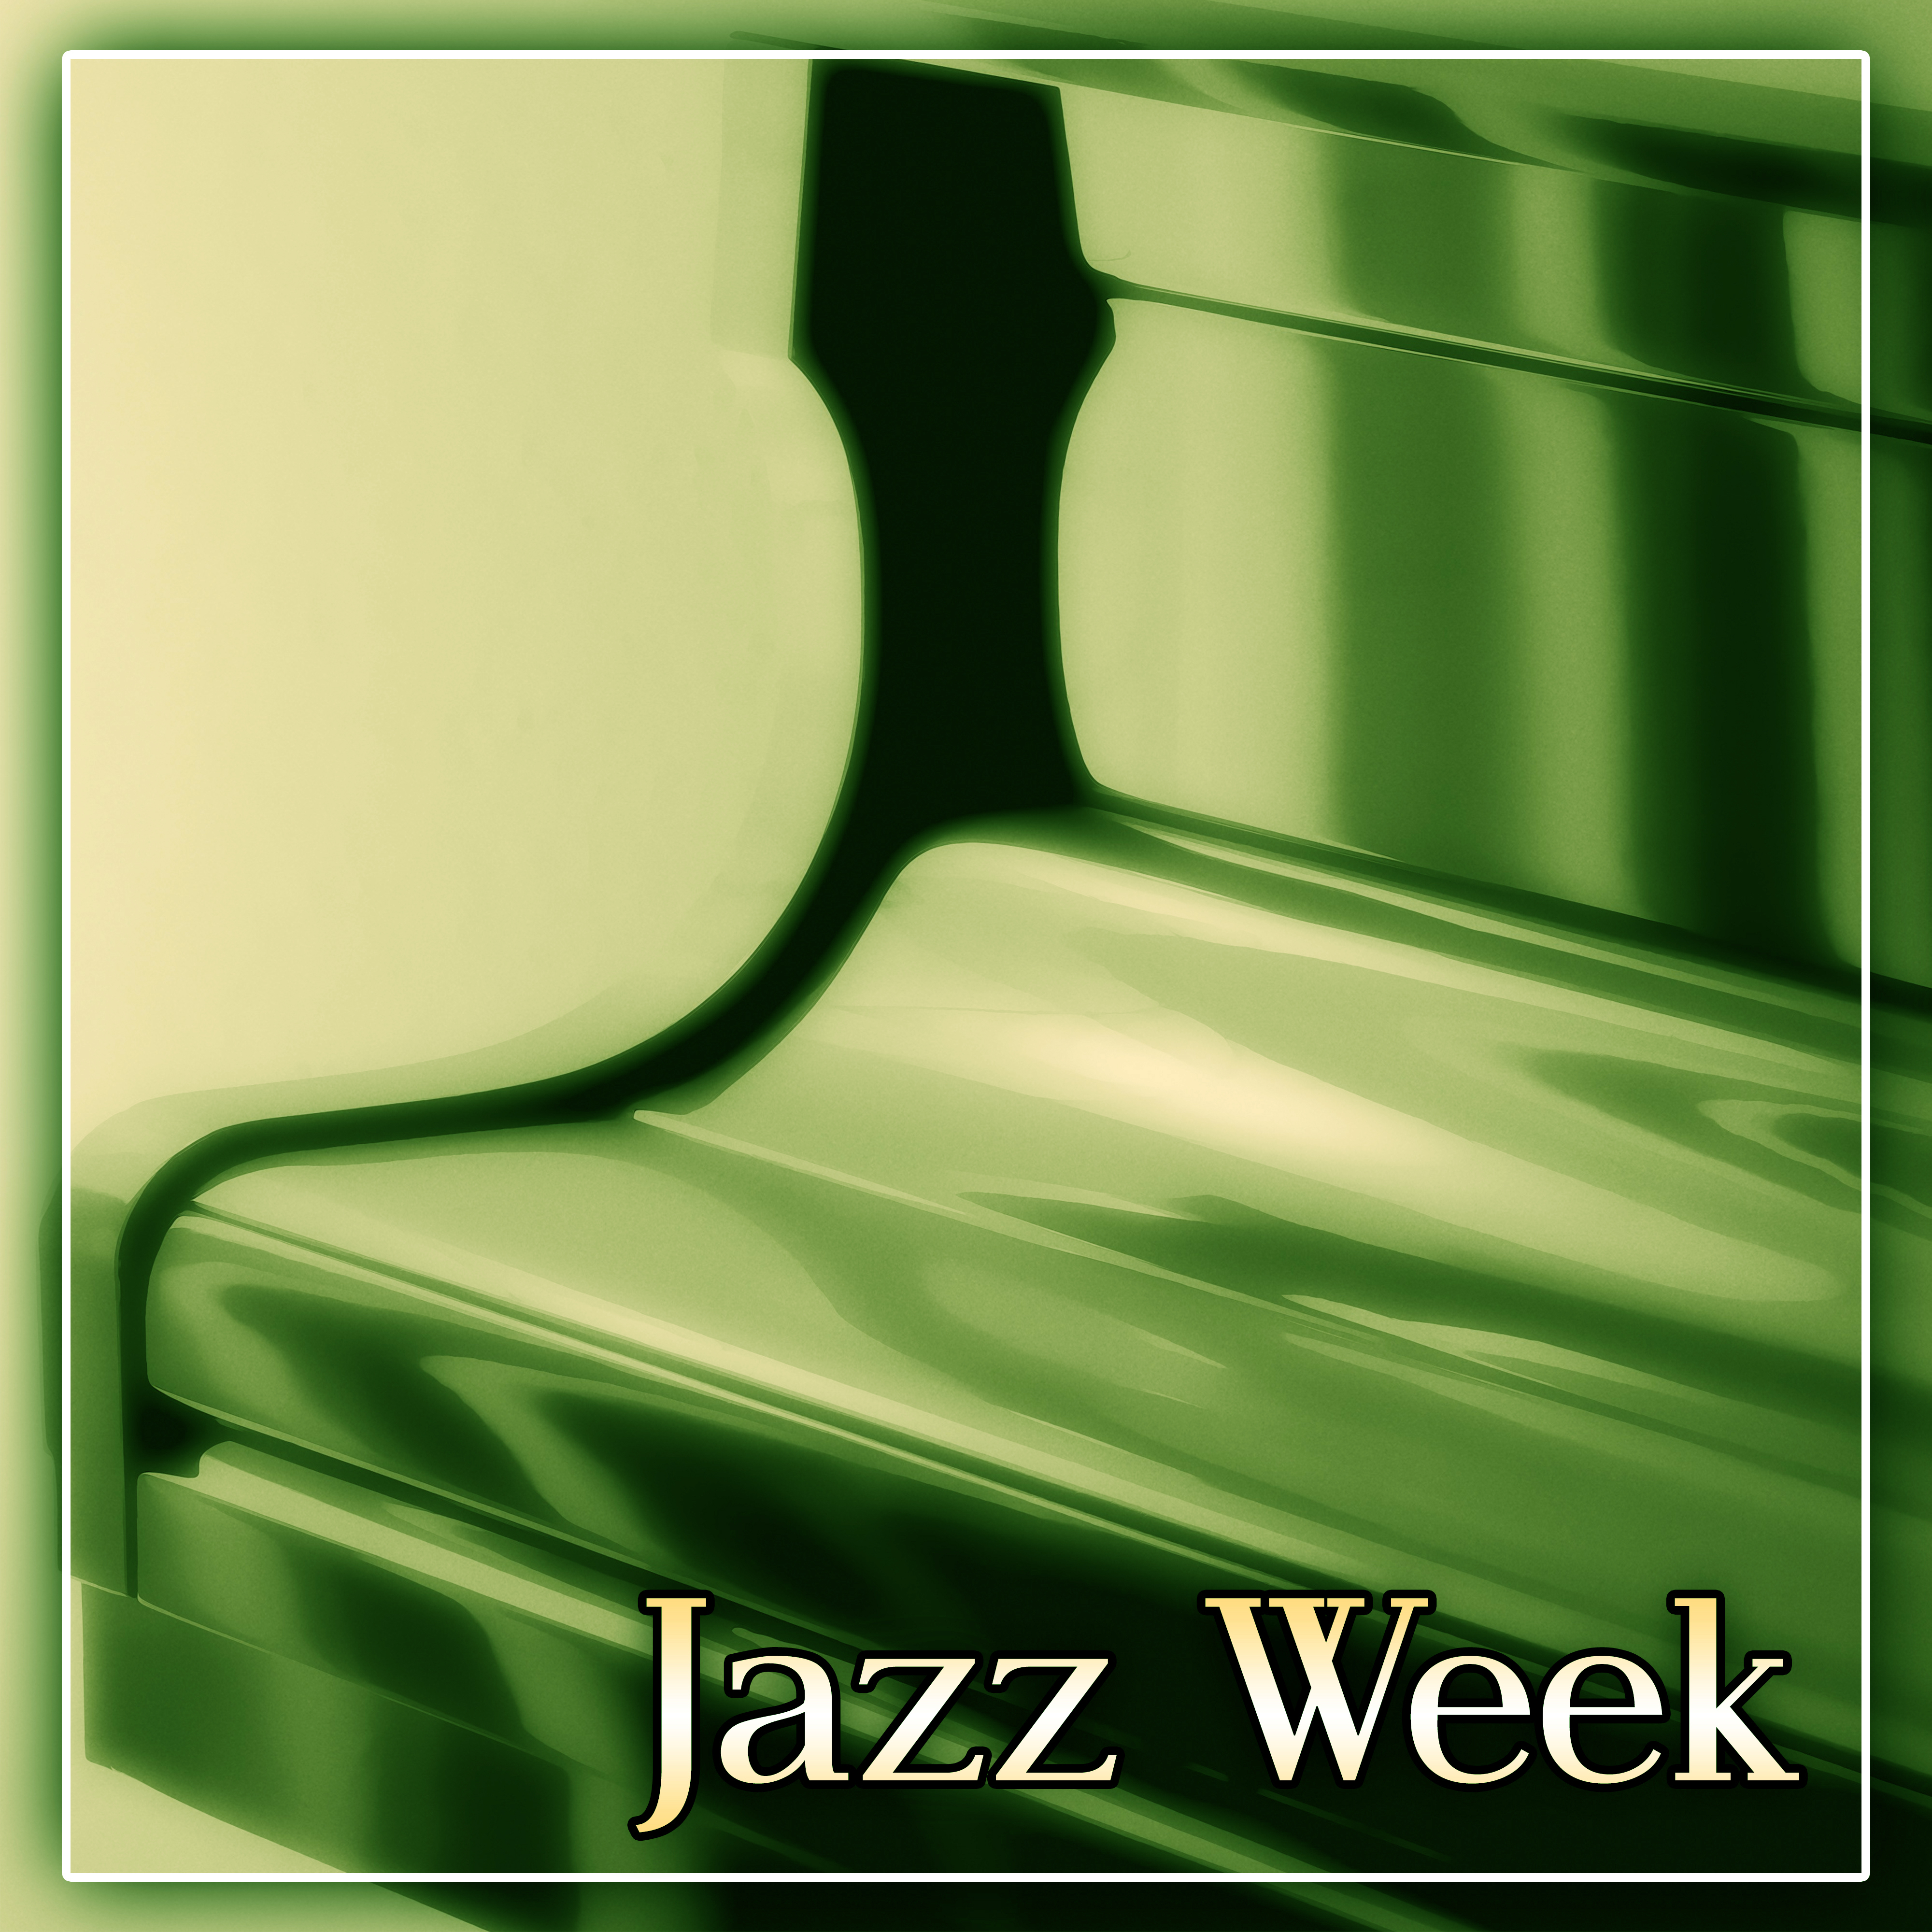 Jazz Week  Best Jazz Week Music for Restaurant, Relaxing Time for Family Dinner, Smooth Jazz, Calming Piano Bar